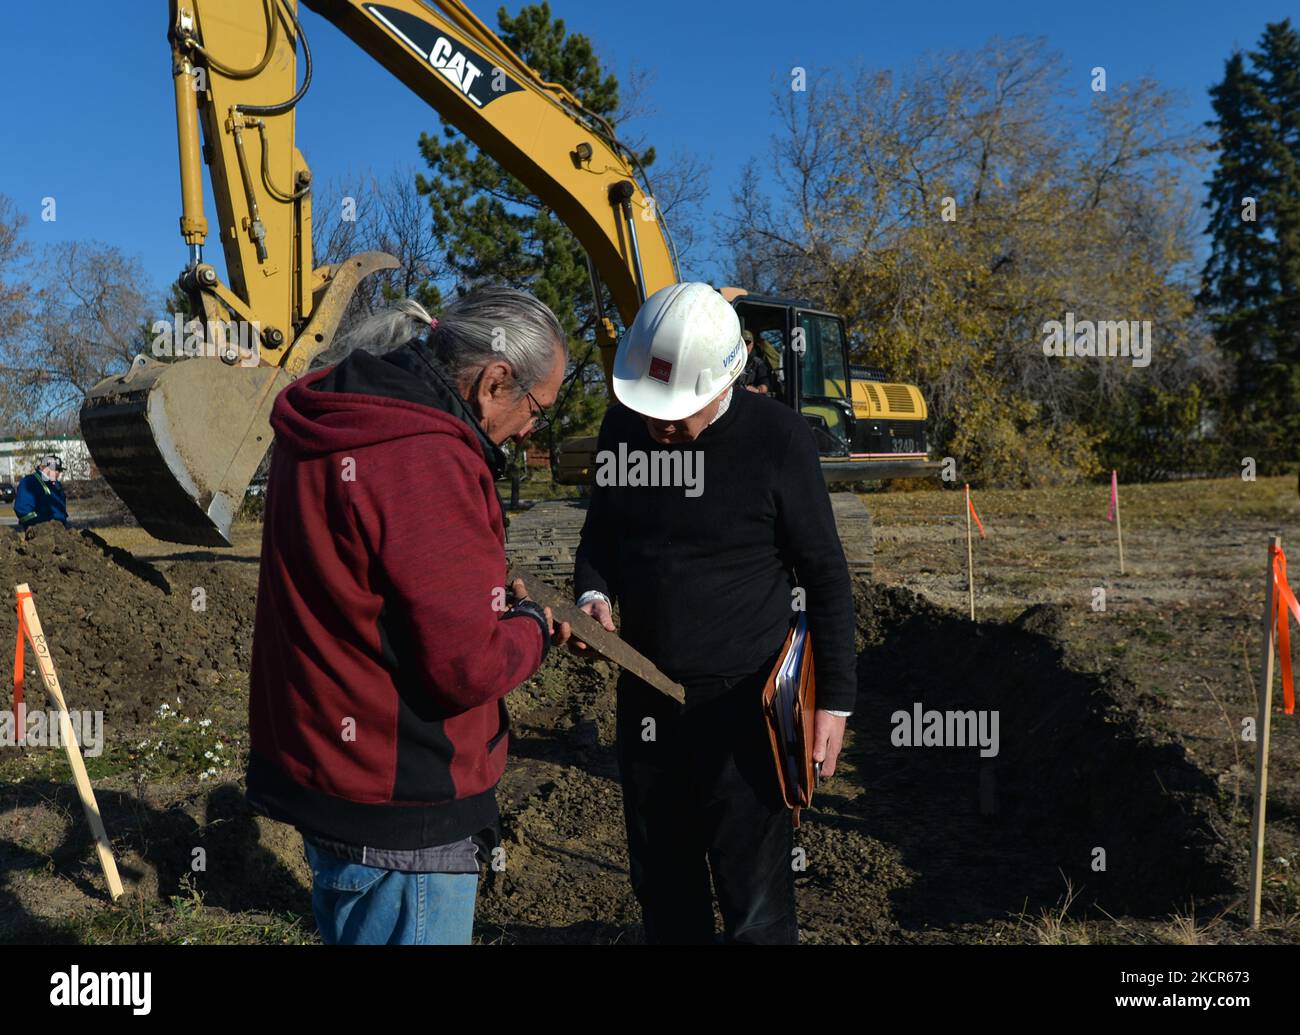 Elder Fernie Marty from the Papaschase First Nation, checks a found piece of wood with architect Gene Dub, as he monitors excavations on the grounds of the former Charles Camsell Hospital, in Edmonton. Second phase of excavation work began today at the site of the former Charles Camsell Hospital, the Edmonton facility that for decades was used to treat Indigenous people with tuberculosis. First Nation members have been calling for construction to stop at the grounds where many believe patients may have been buried. The search is being funded by the property's developer. On Thursday, 21 October Stock Photo